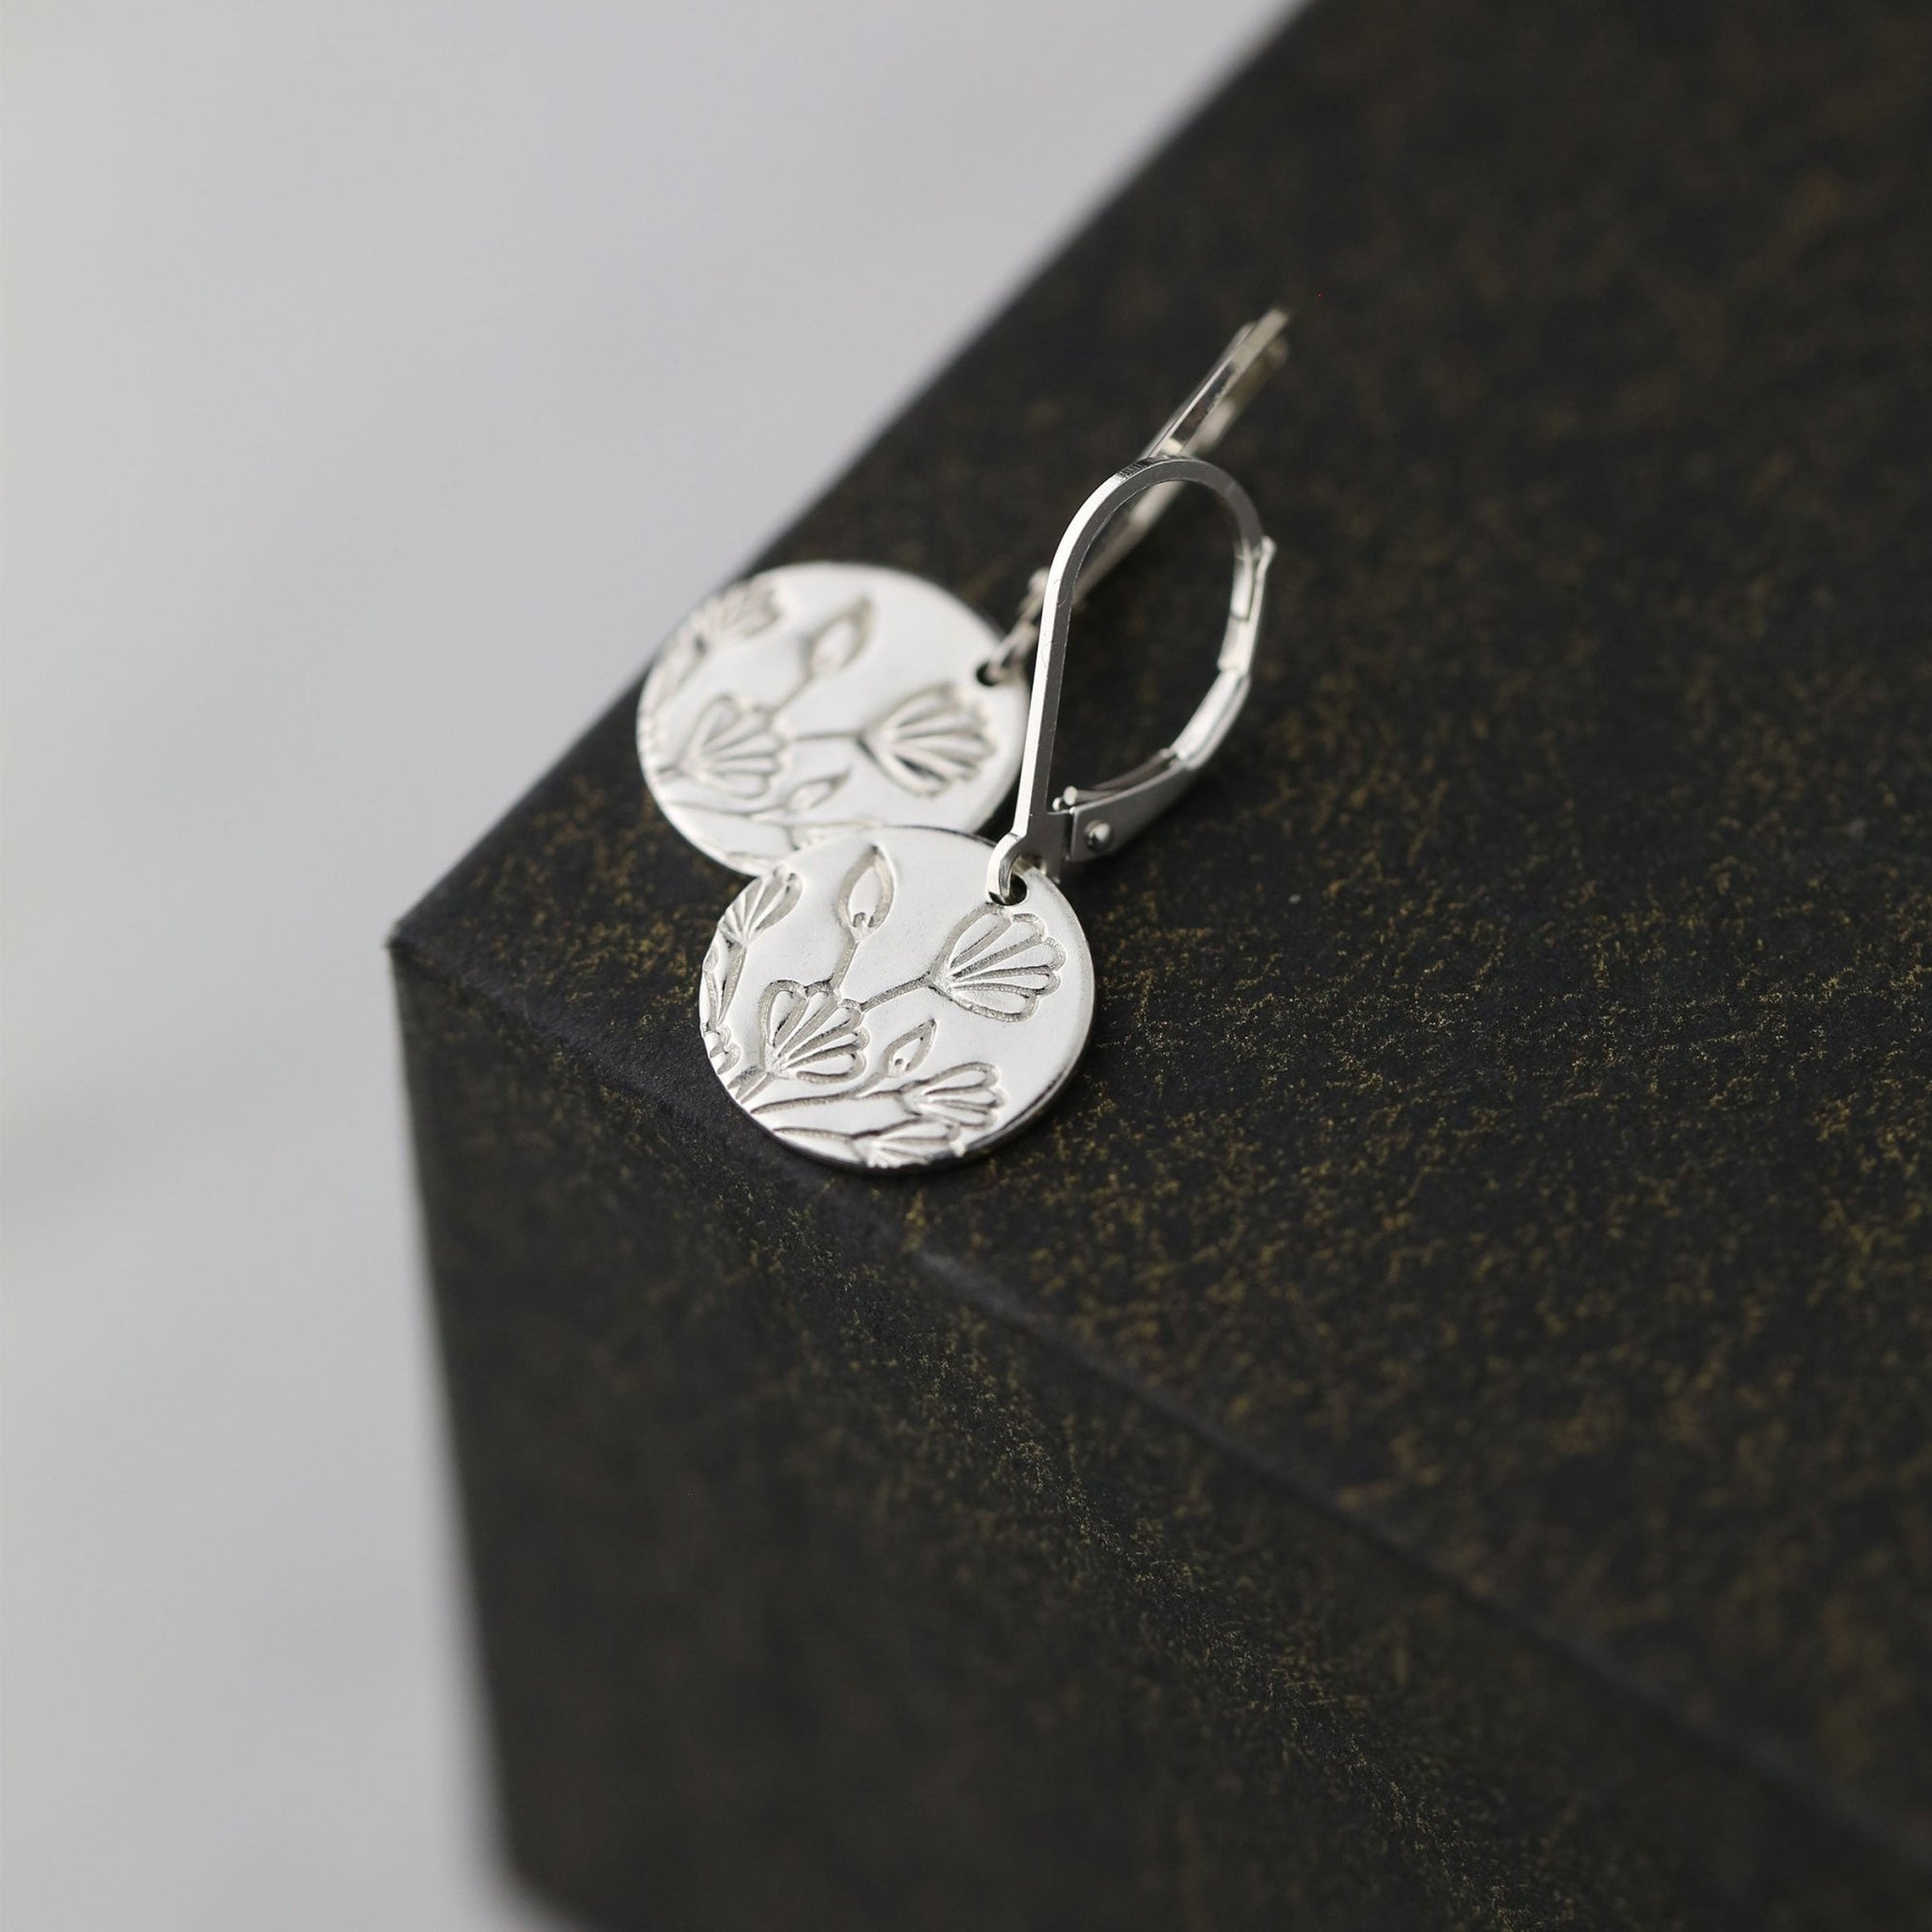 Silver Stamped Floral Disc Earrings handmade by Burnish